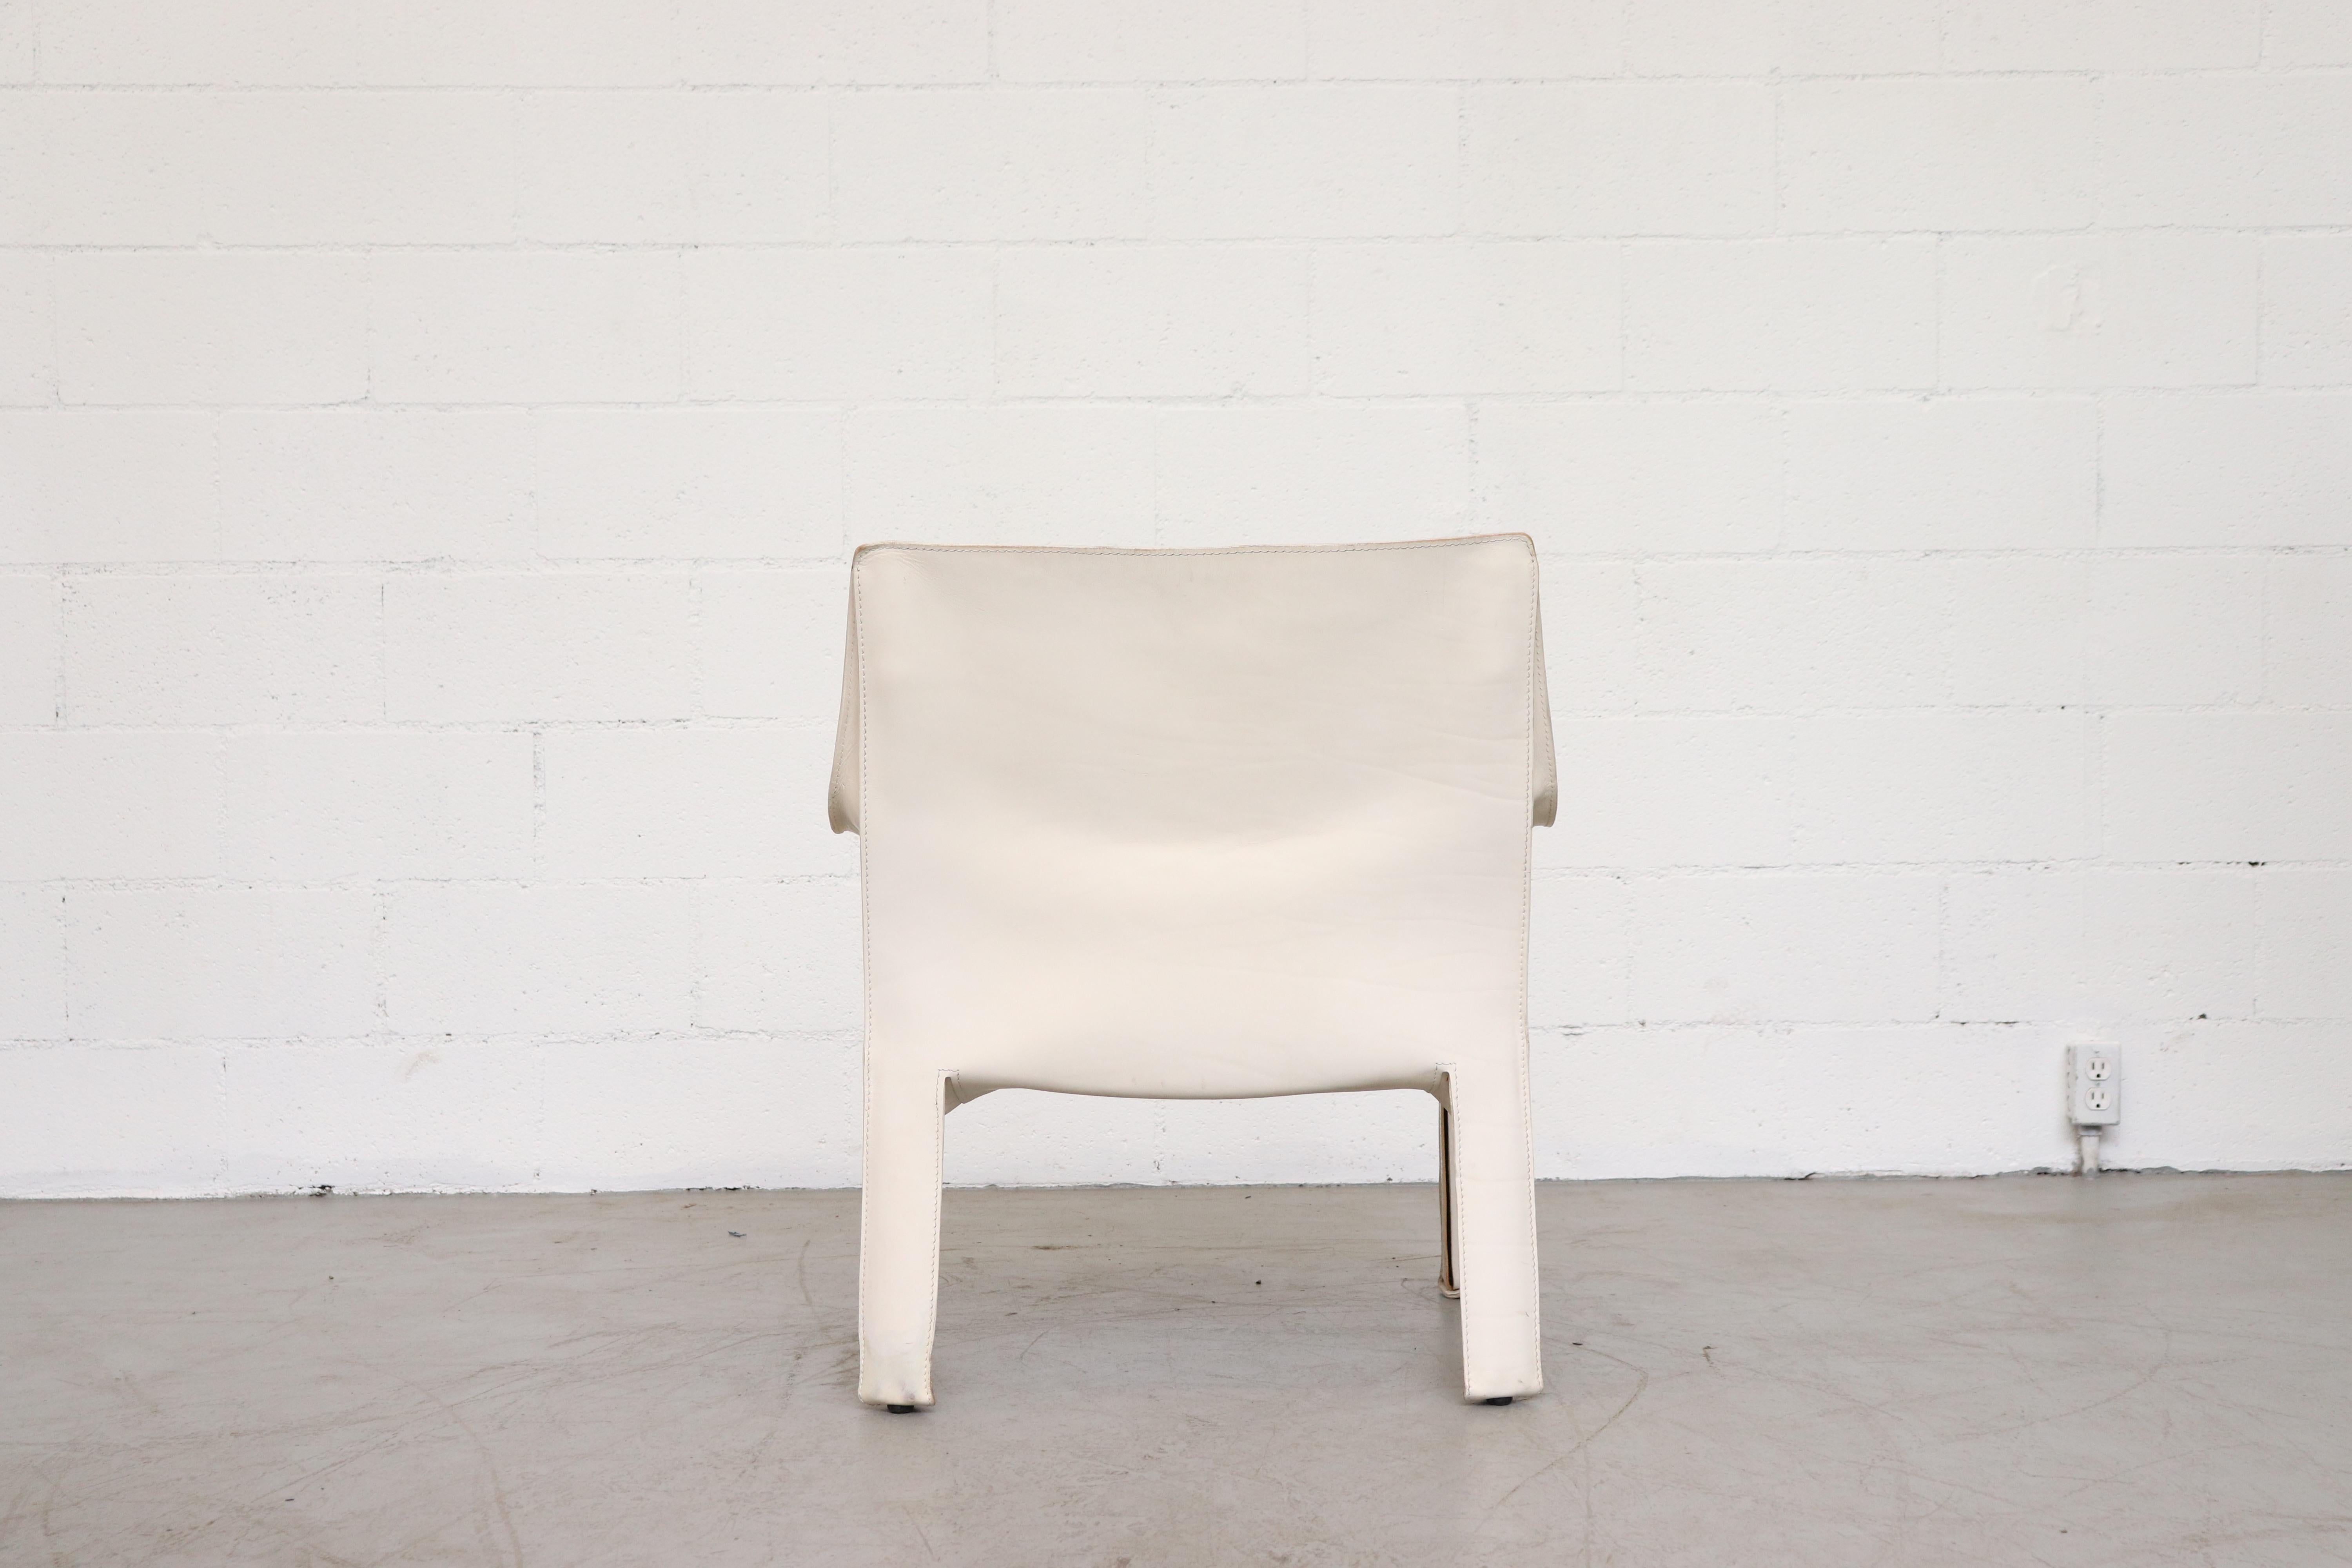 Late 20th Century Pair of Mario Bellini White Leather Cab Chairs for Cassina